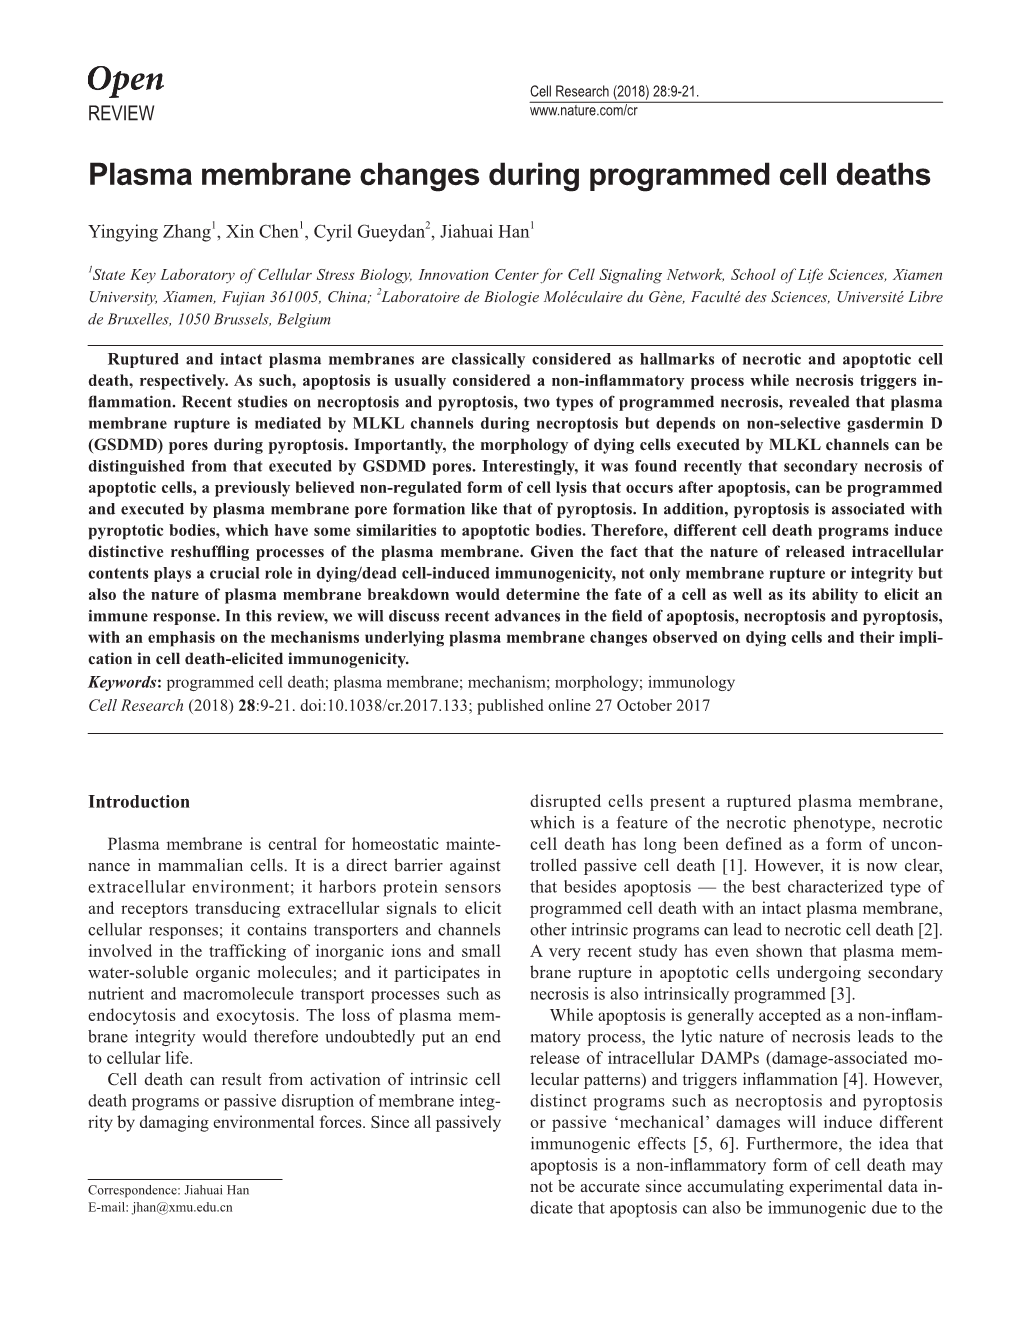 Plasma Membrane Changes During Programmed Cell Deaths